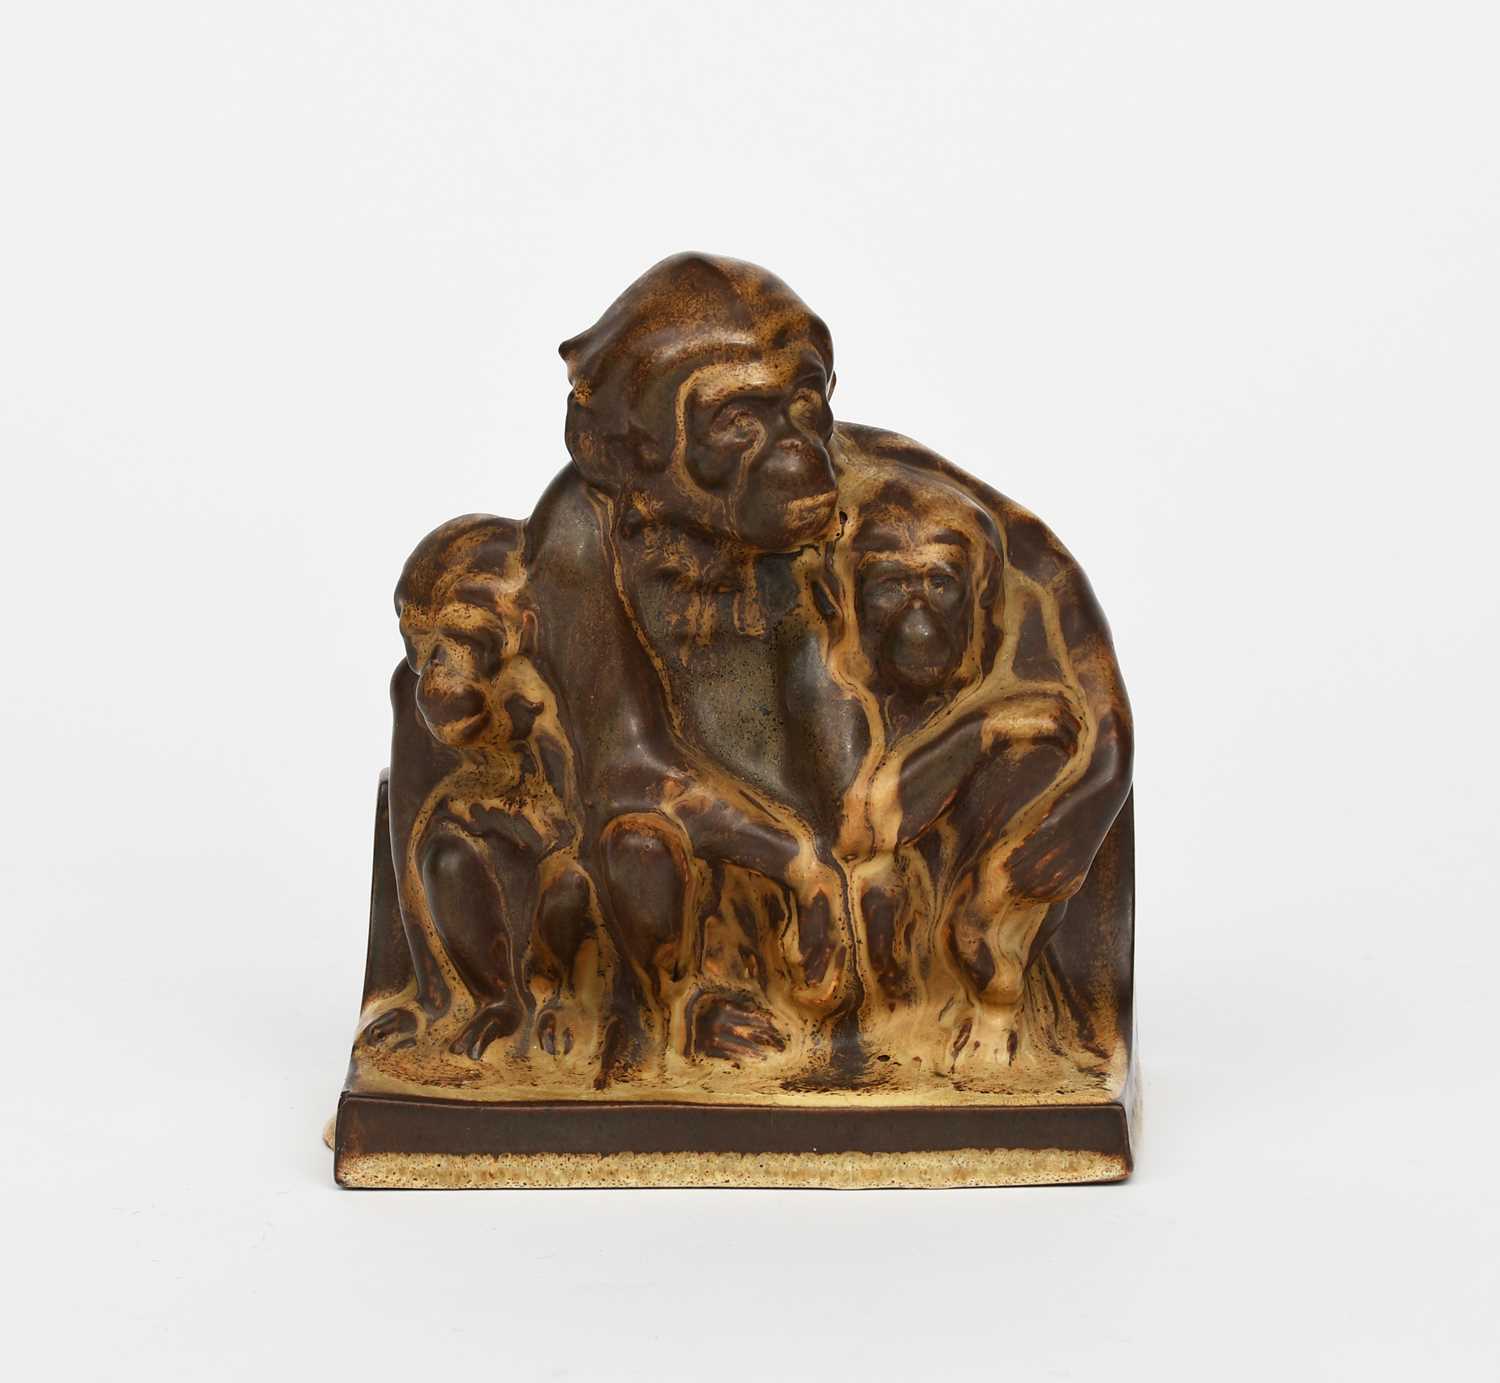 A Carter Stabler & Adams Poole Pottery Three Wise Monkeys book end designed by Hugh Llewellyn,